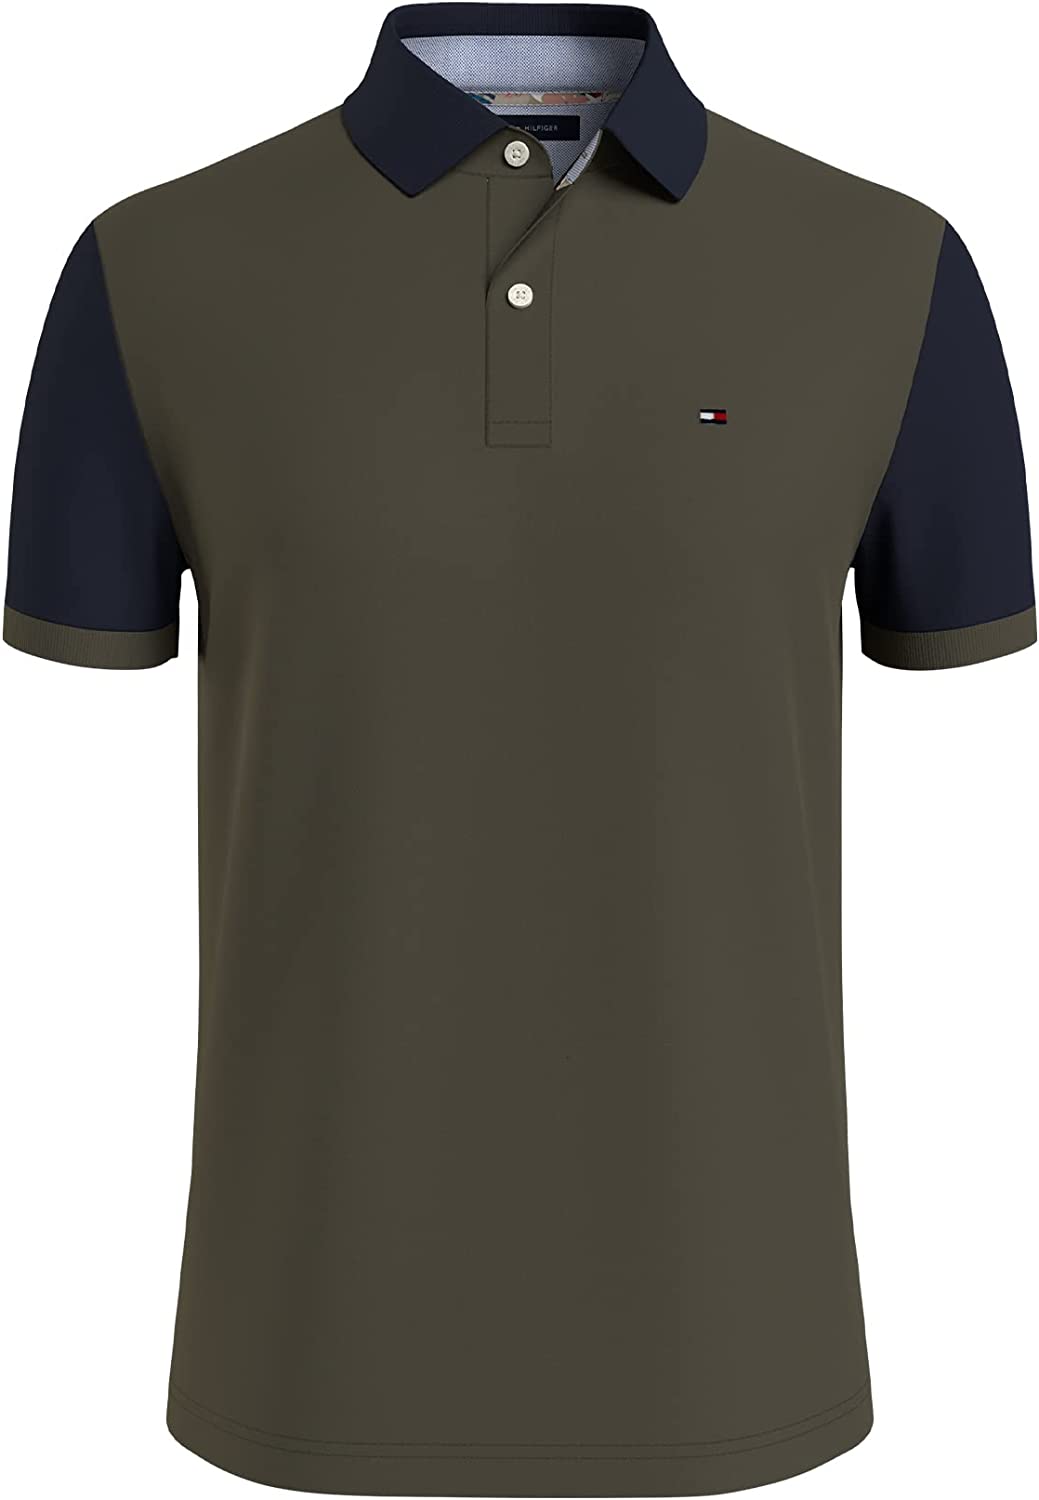 Tommy Hilfiger Men's Tonal Colorblock Pique Polo Shirt  Color Army Green Size S